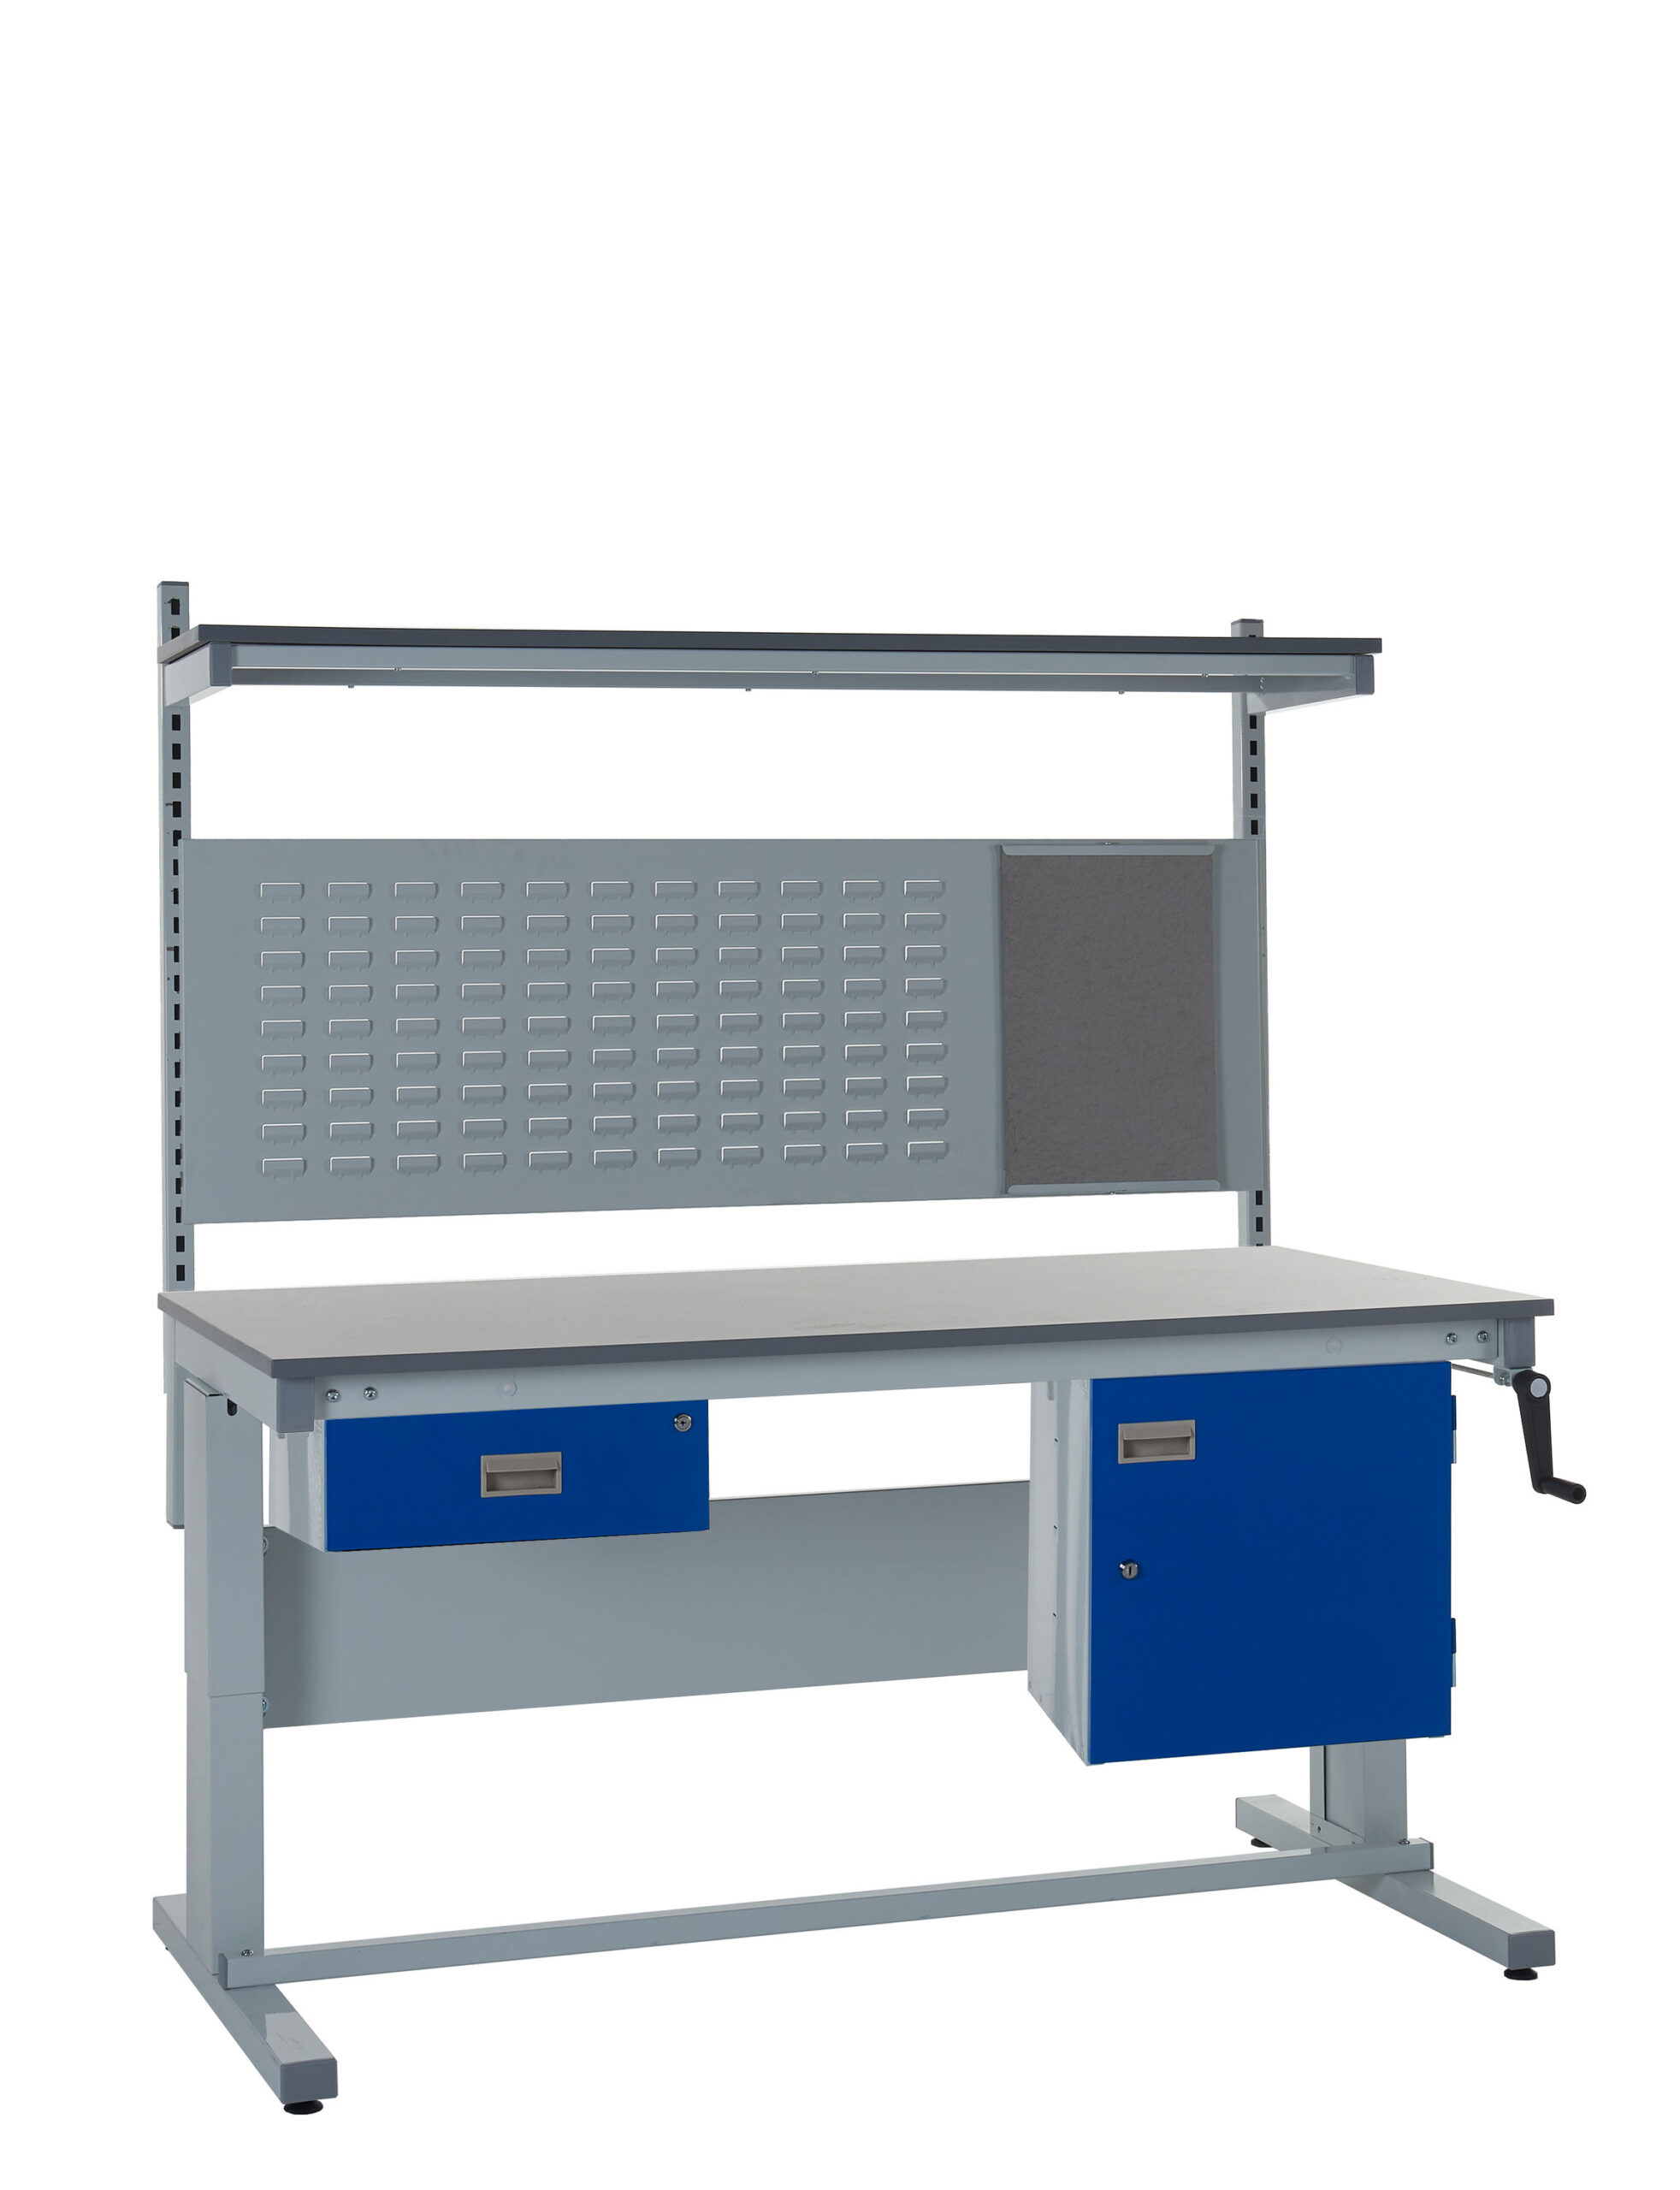 Adjustable height cantilever workbench